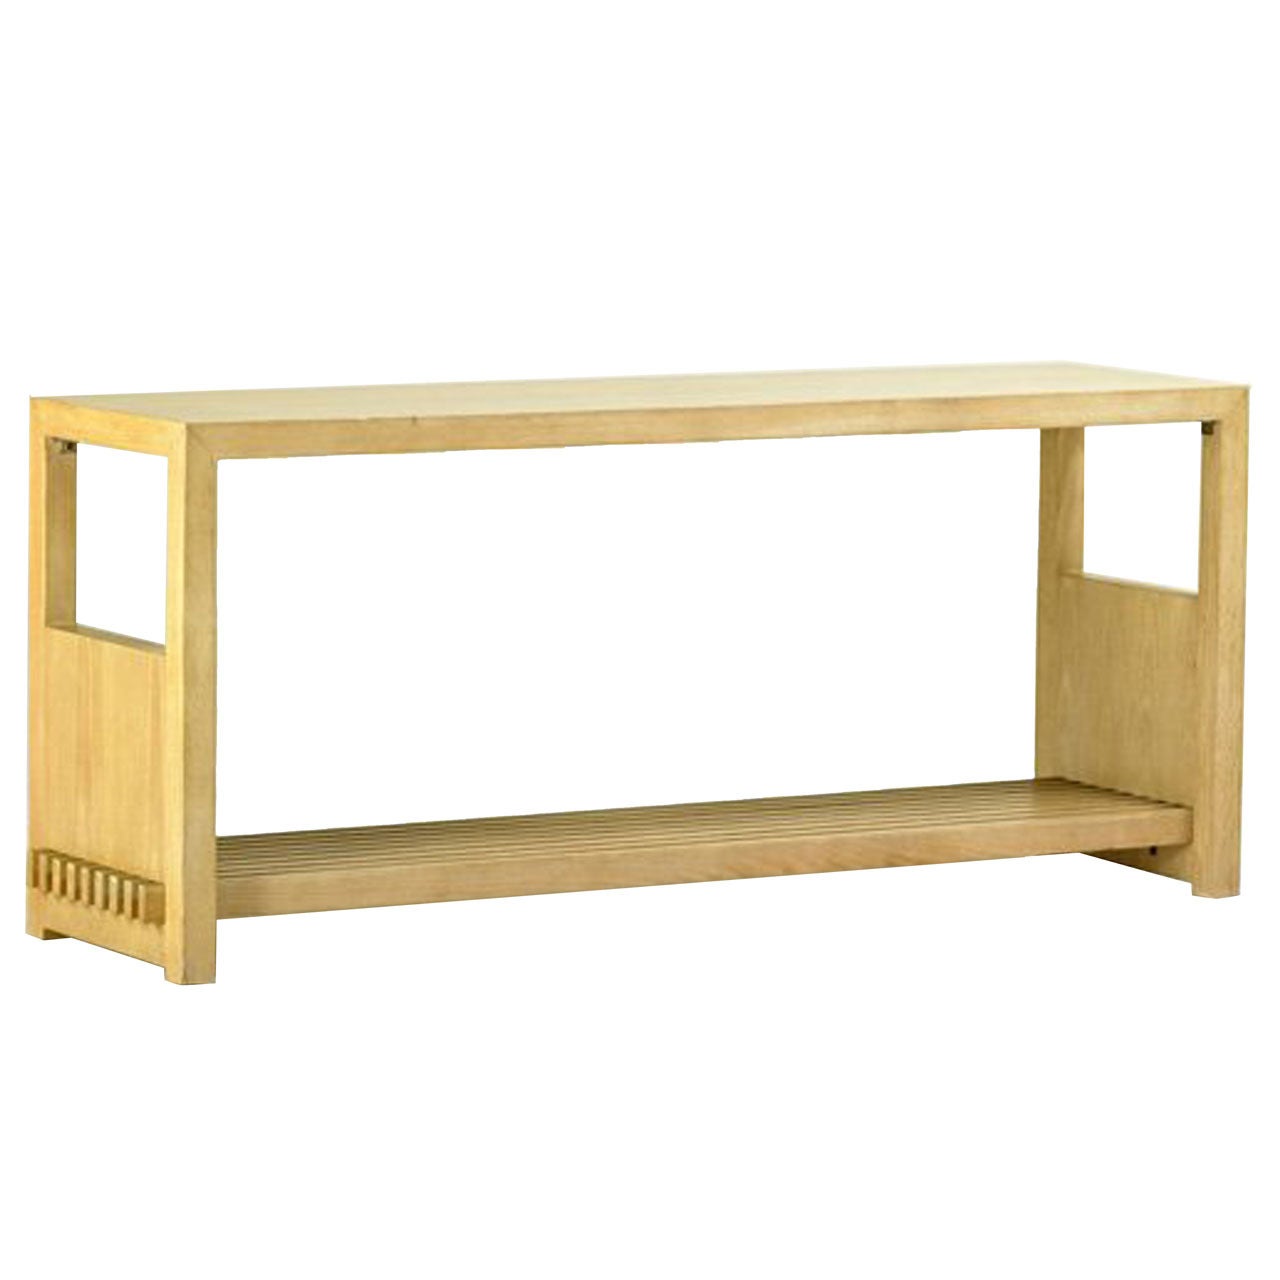 Jay Spectre Cerused White Oak Console Table for Century Furniture Company